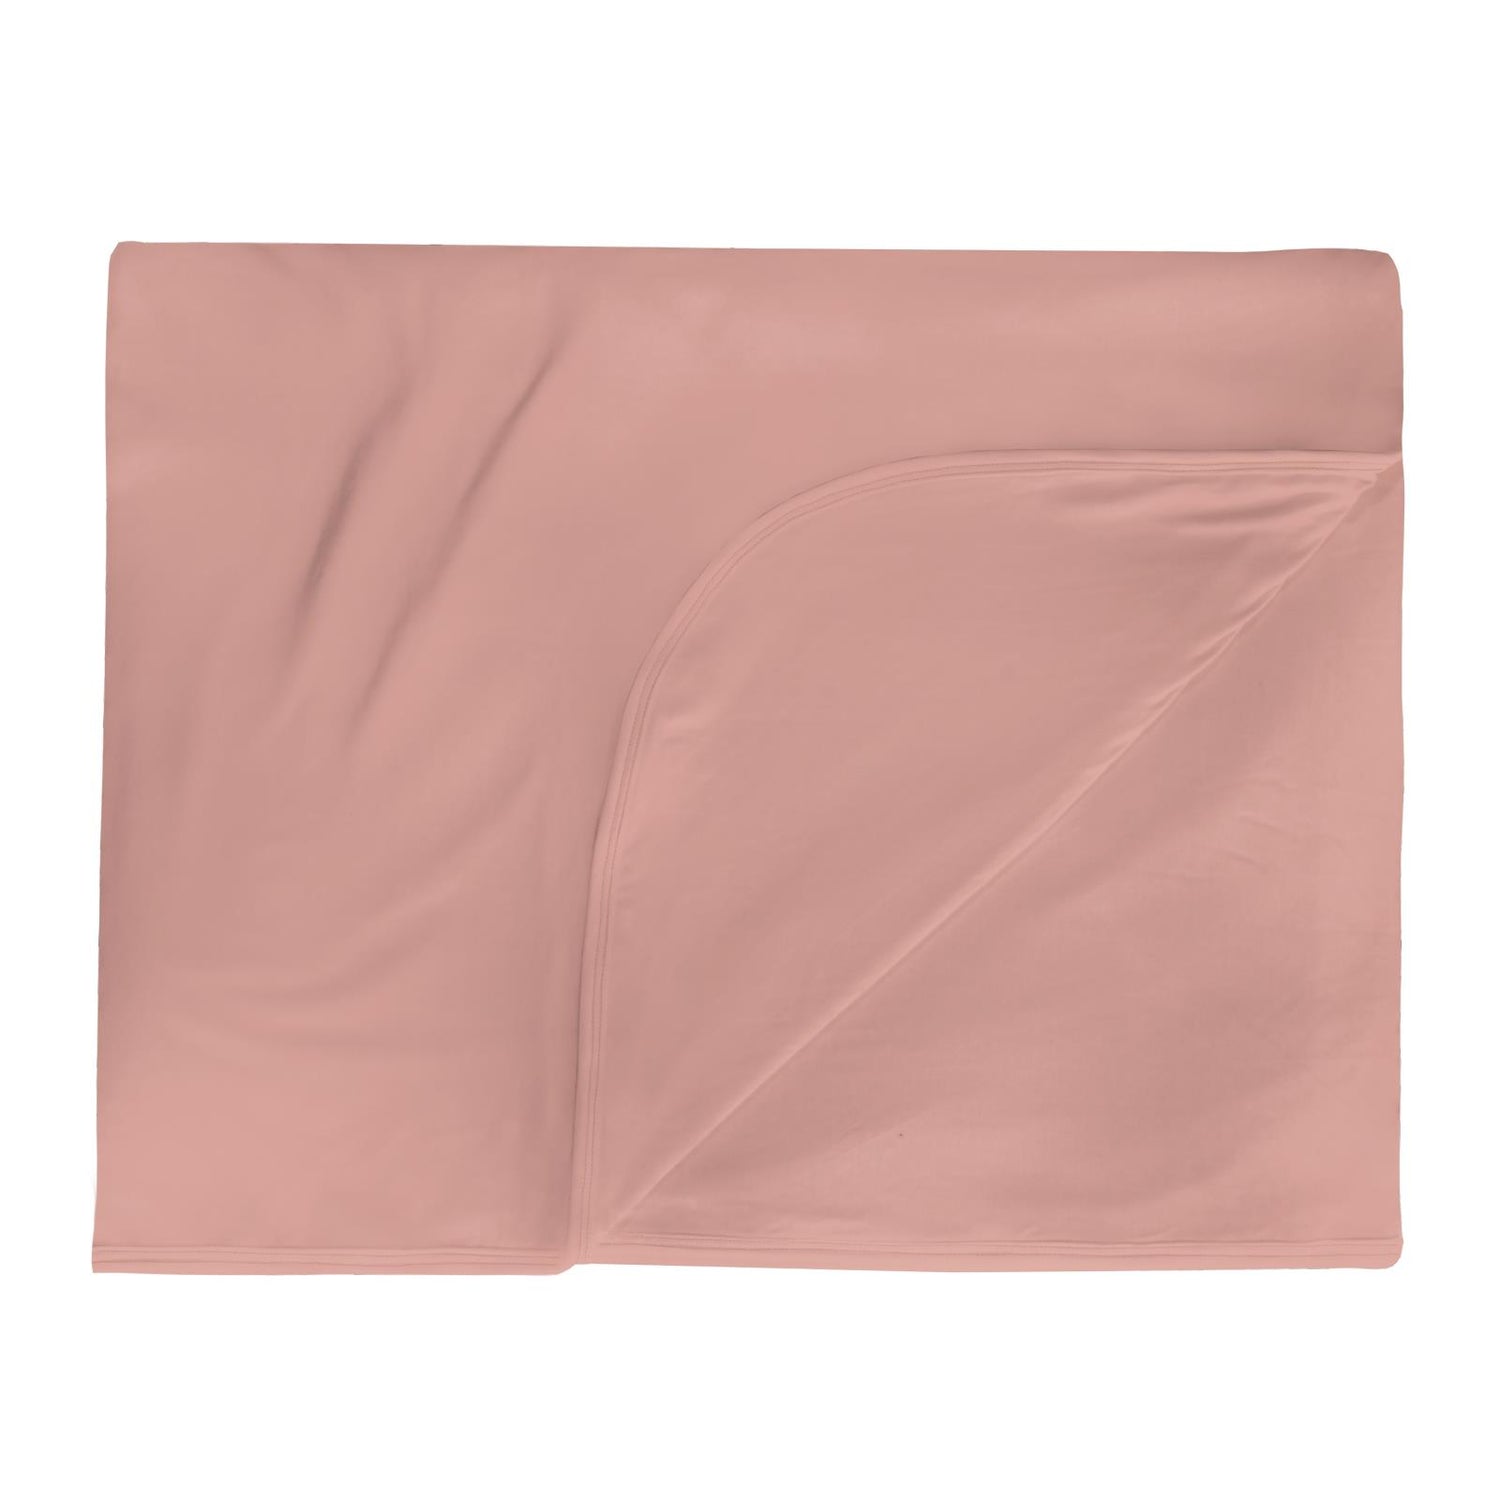 Double Layer Throw Blanket in Blush